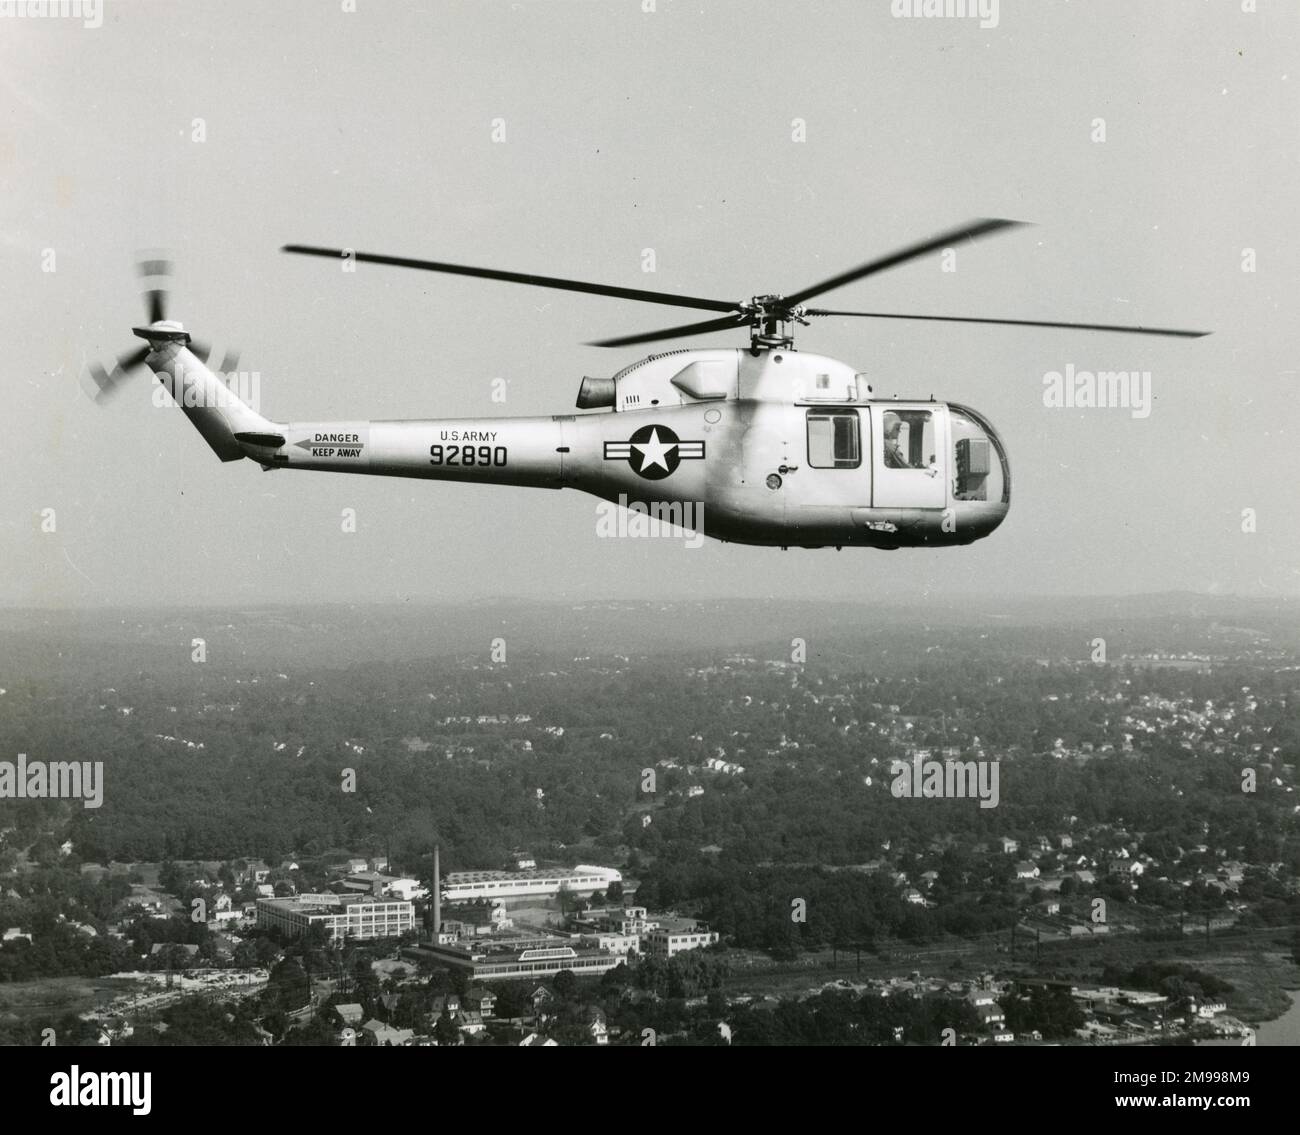 Sikorsky S-59 or XH-39, 49-2890. Stock Photo